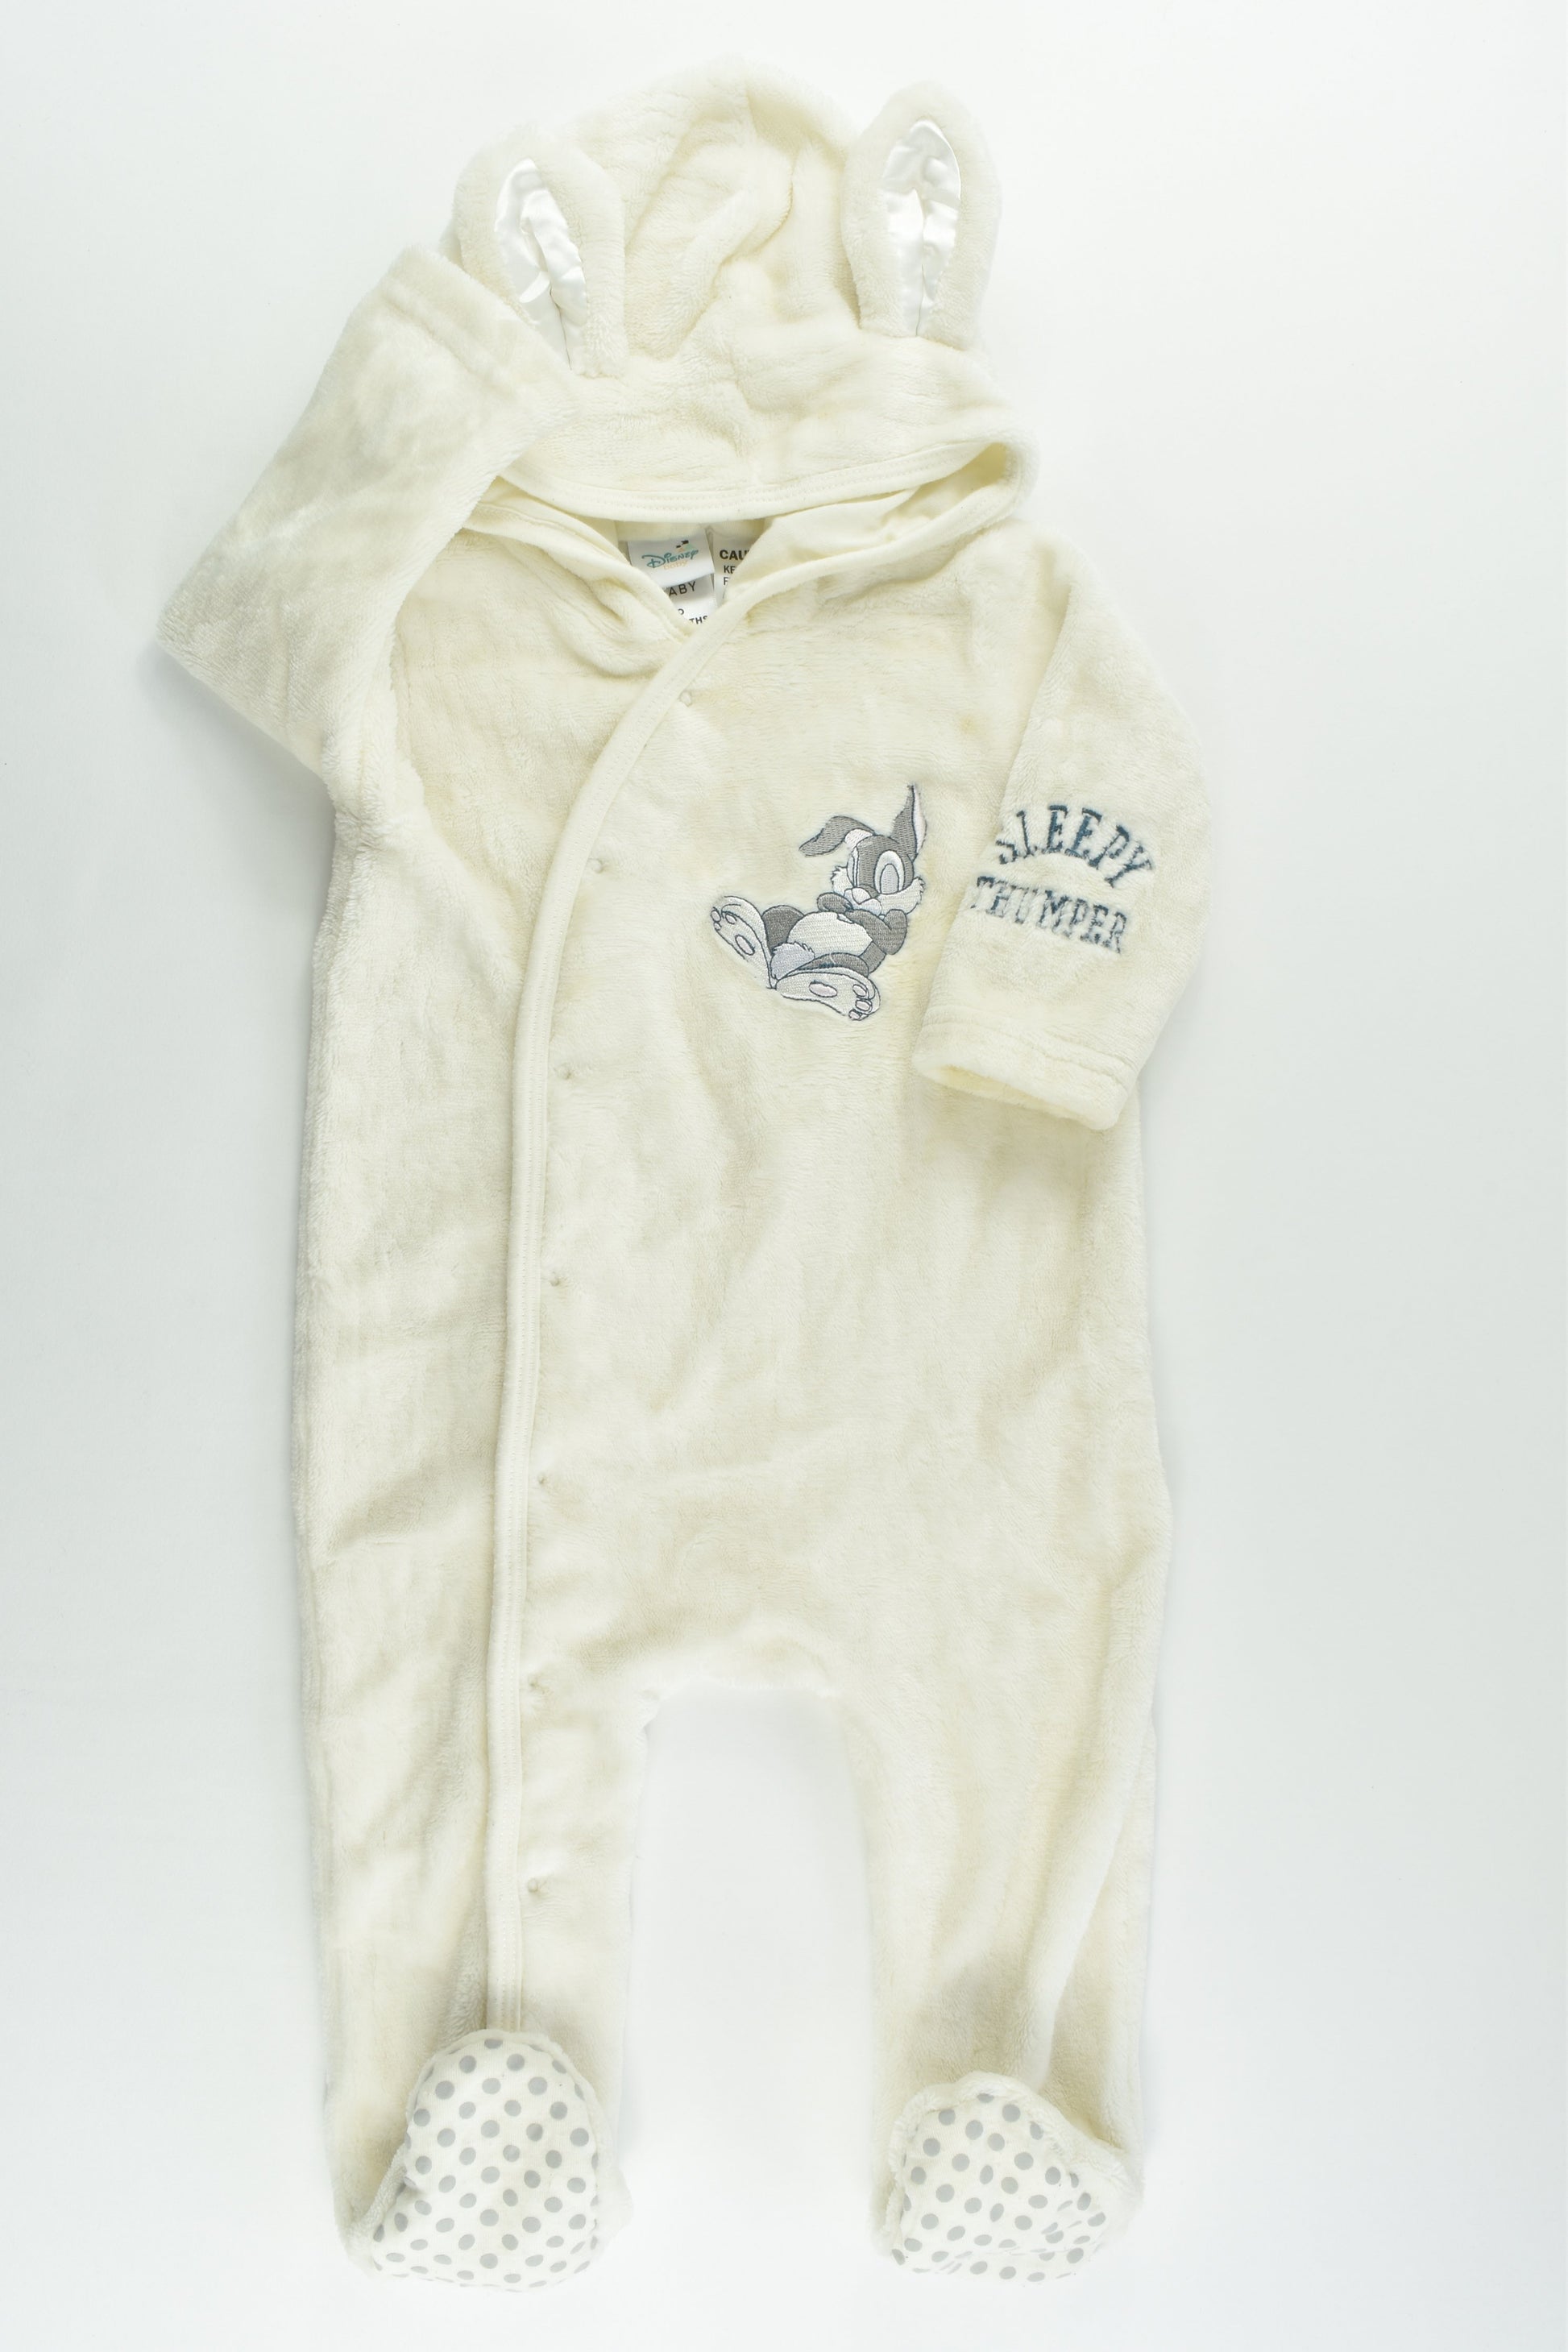 Disney Baby by Target Size 0 (6-12 months) 'Sleepy Thumper' Pramsuit